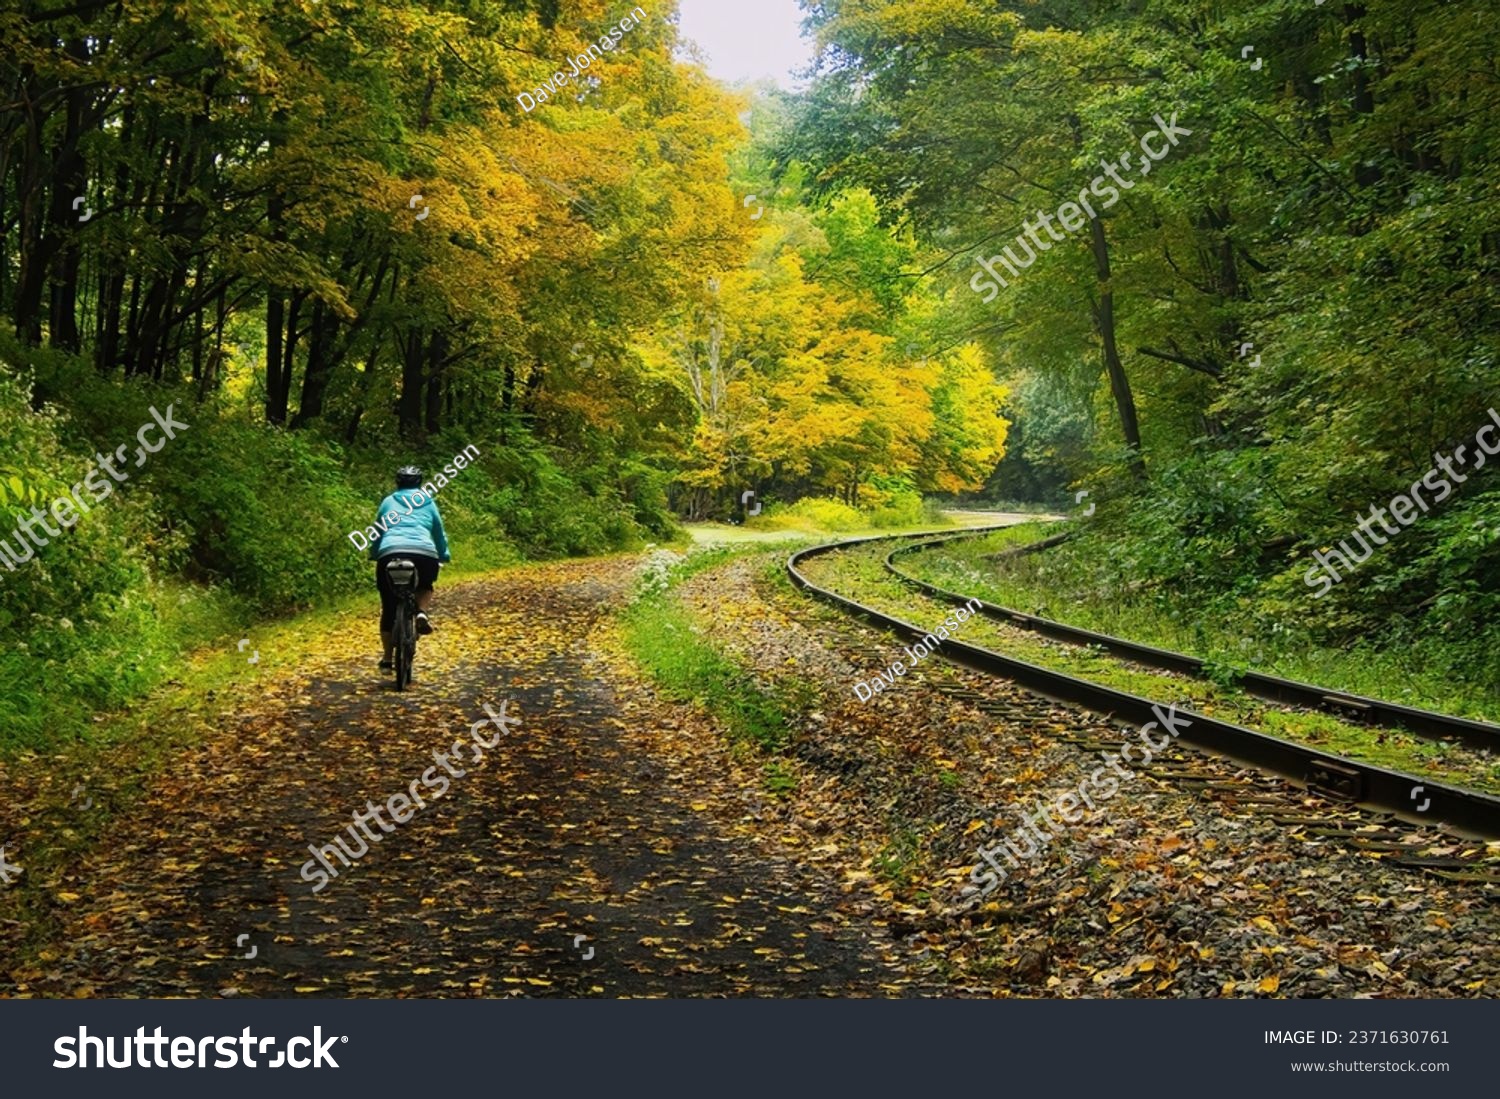 Landscape of a cyclist, seen from behind, on the Great Allegheny Passage Trail curving past railroad tracks and a forest on a moody early Autumn day. #2371630761